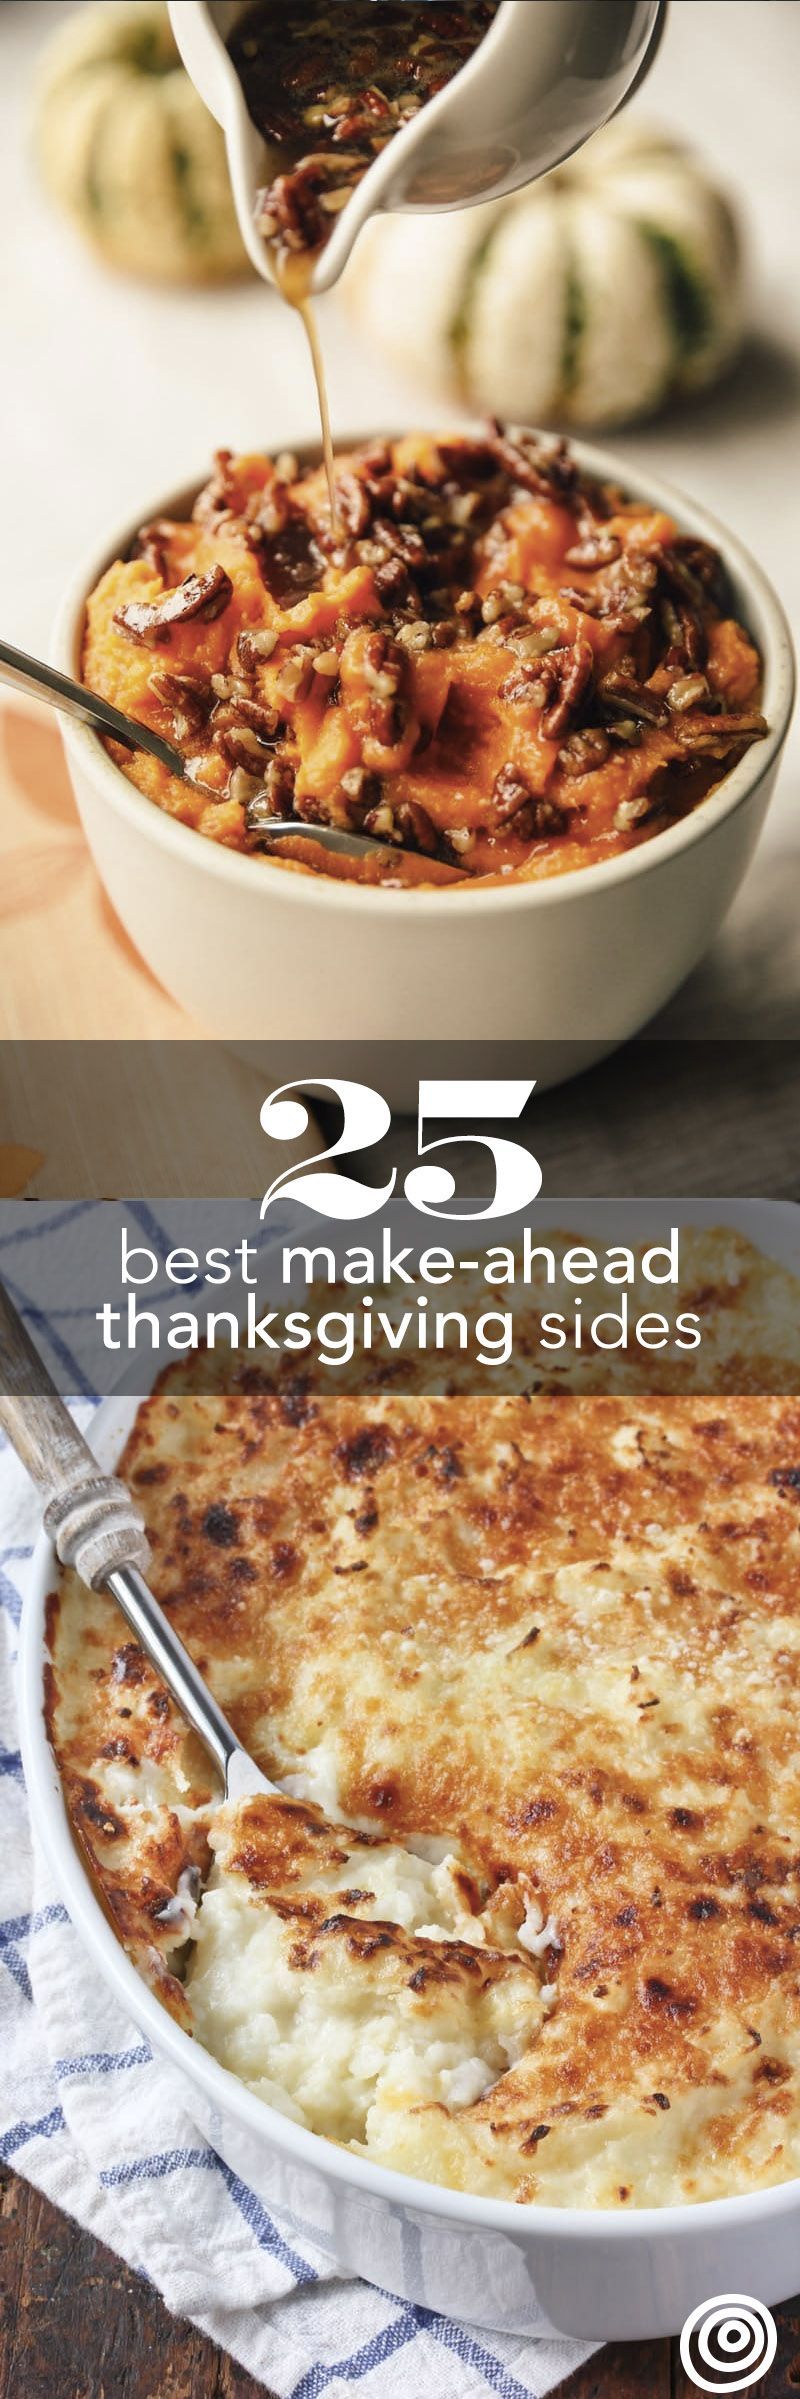 40+ Thanksgiving Side Dishes You Can Make Ahead of Time -   19 make ahead sides for thanksgiving ideas